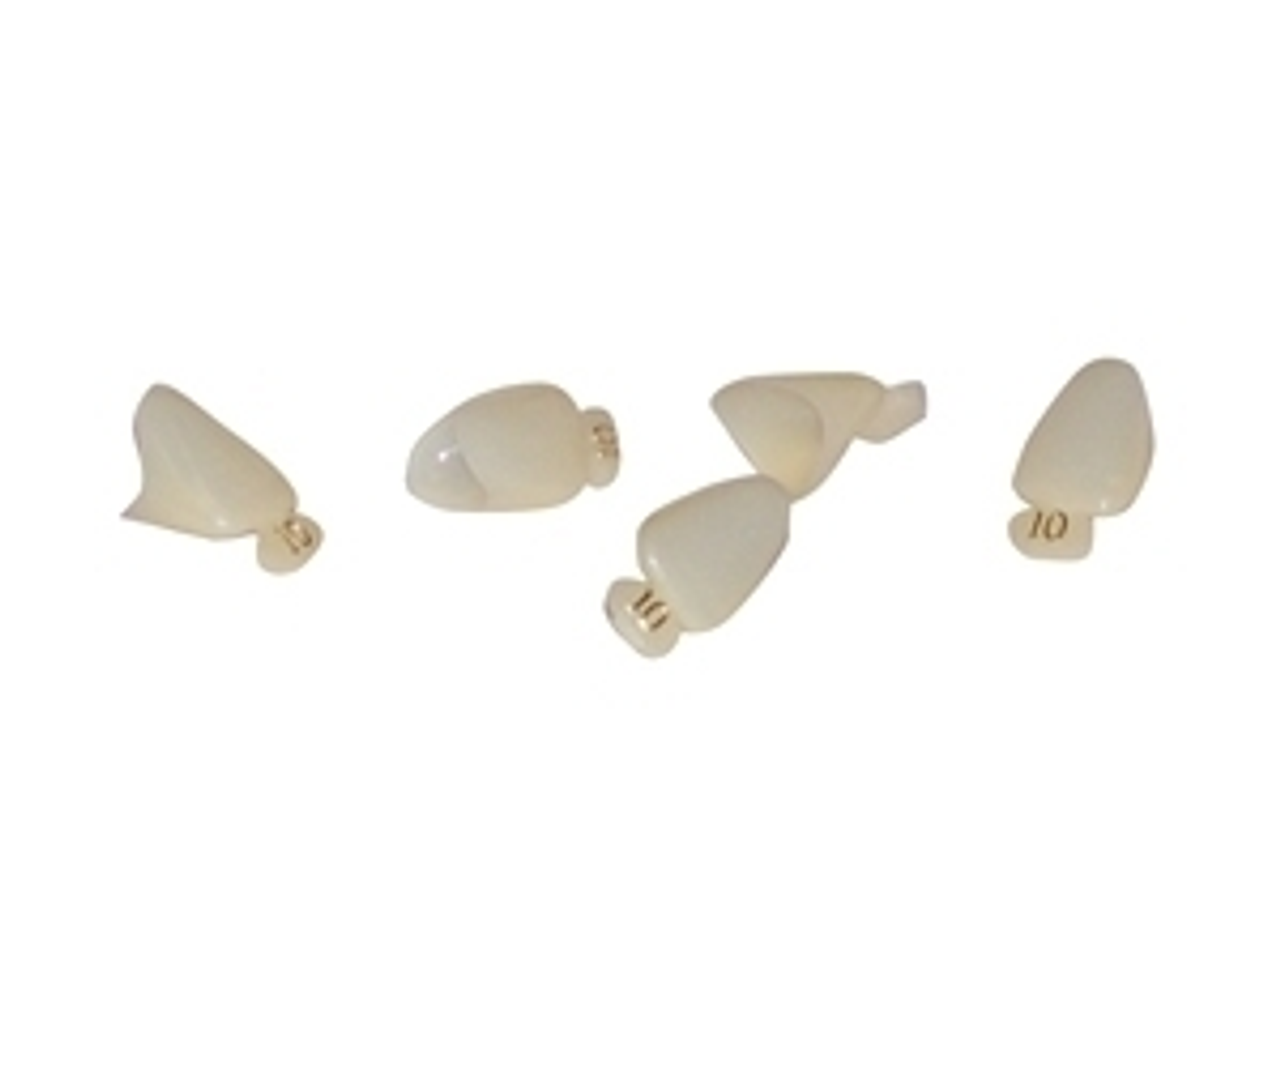 Mark3 Polycarbonate Crowns